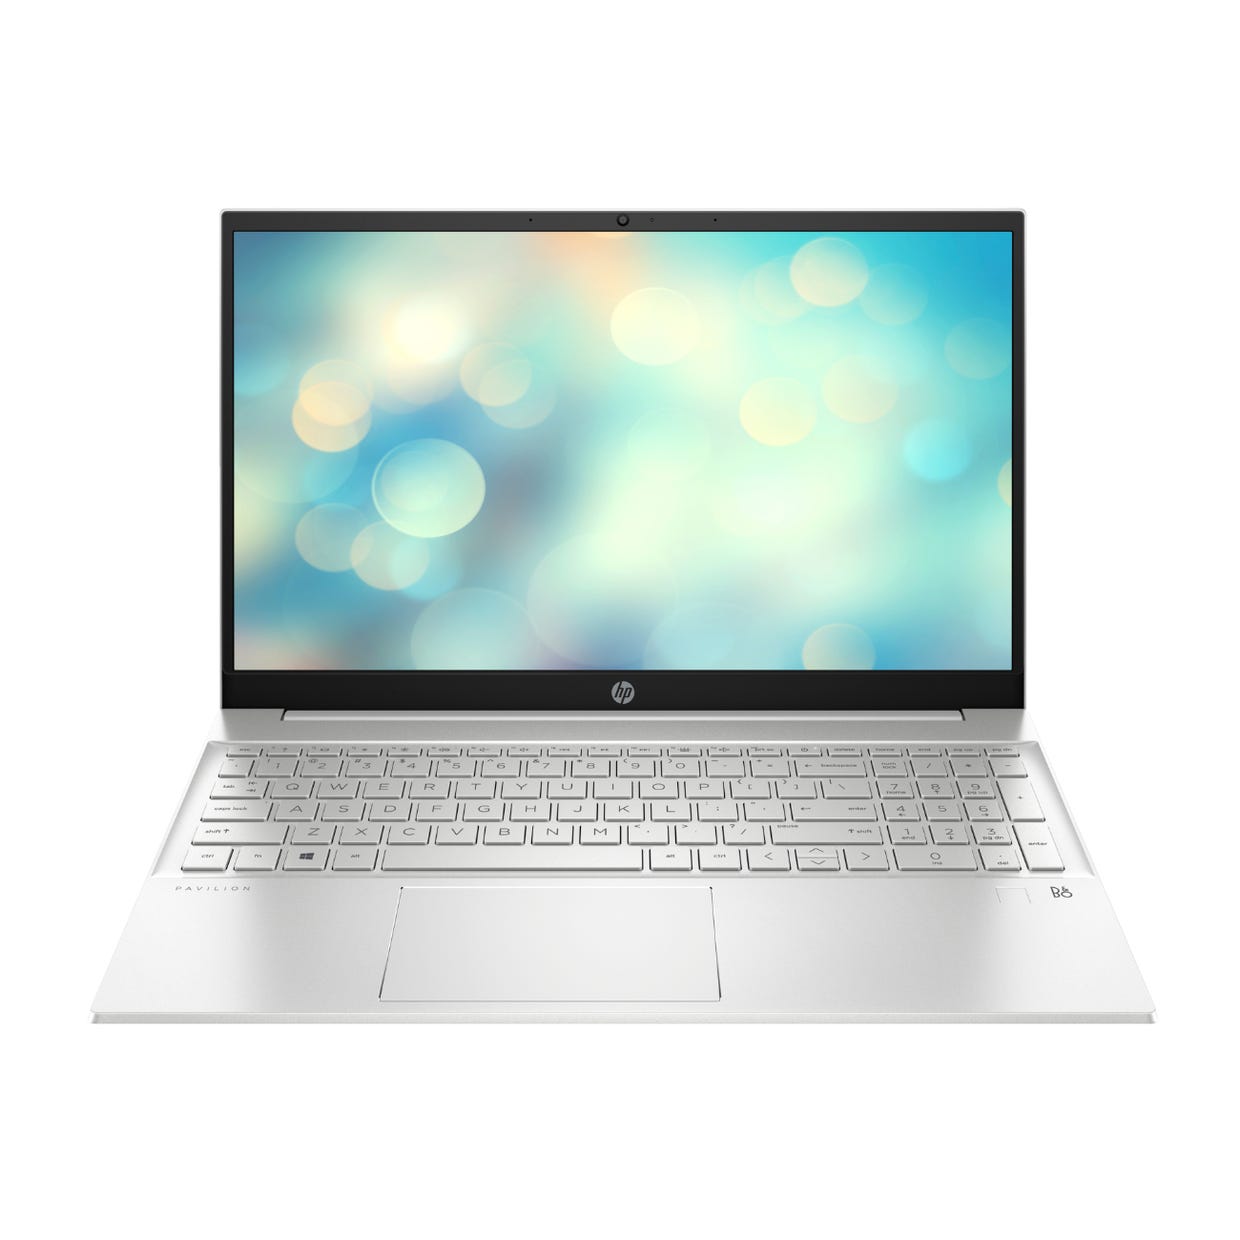 Silver HP Pavilion laptop with a white keyboard and screen displaying bokeh lights.